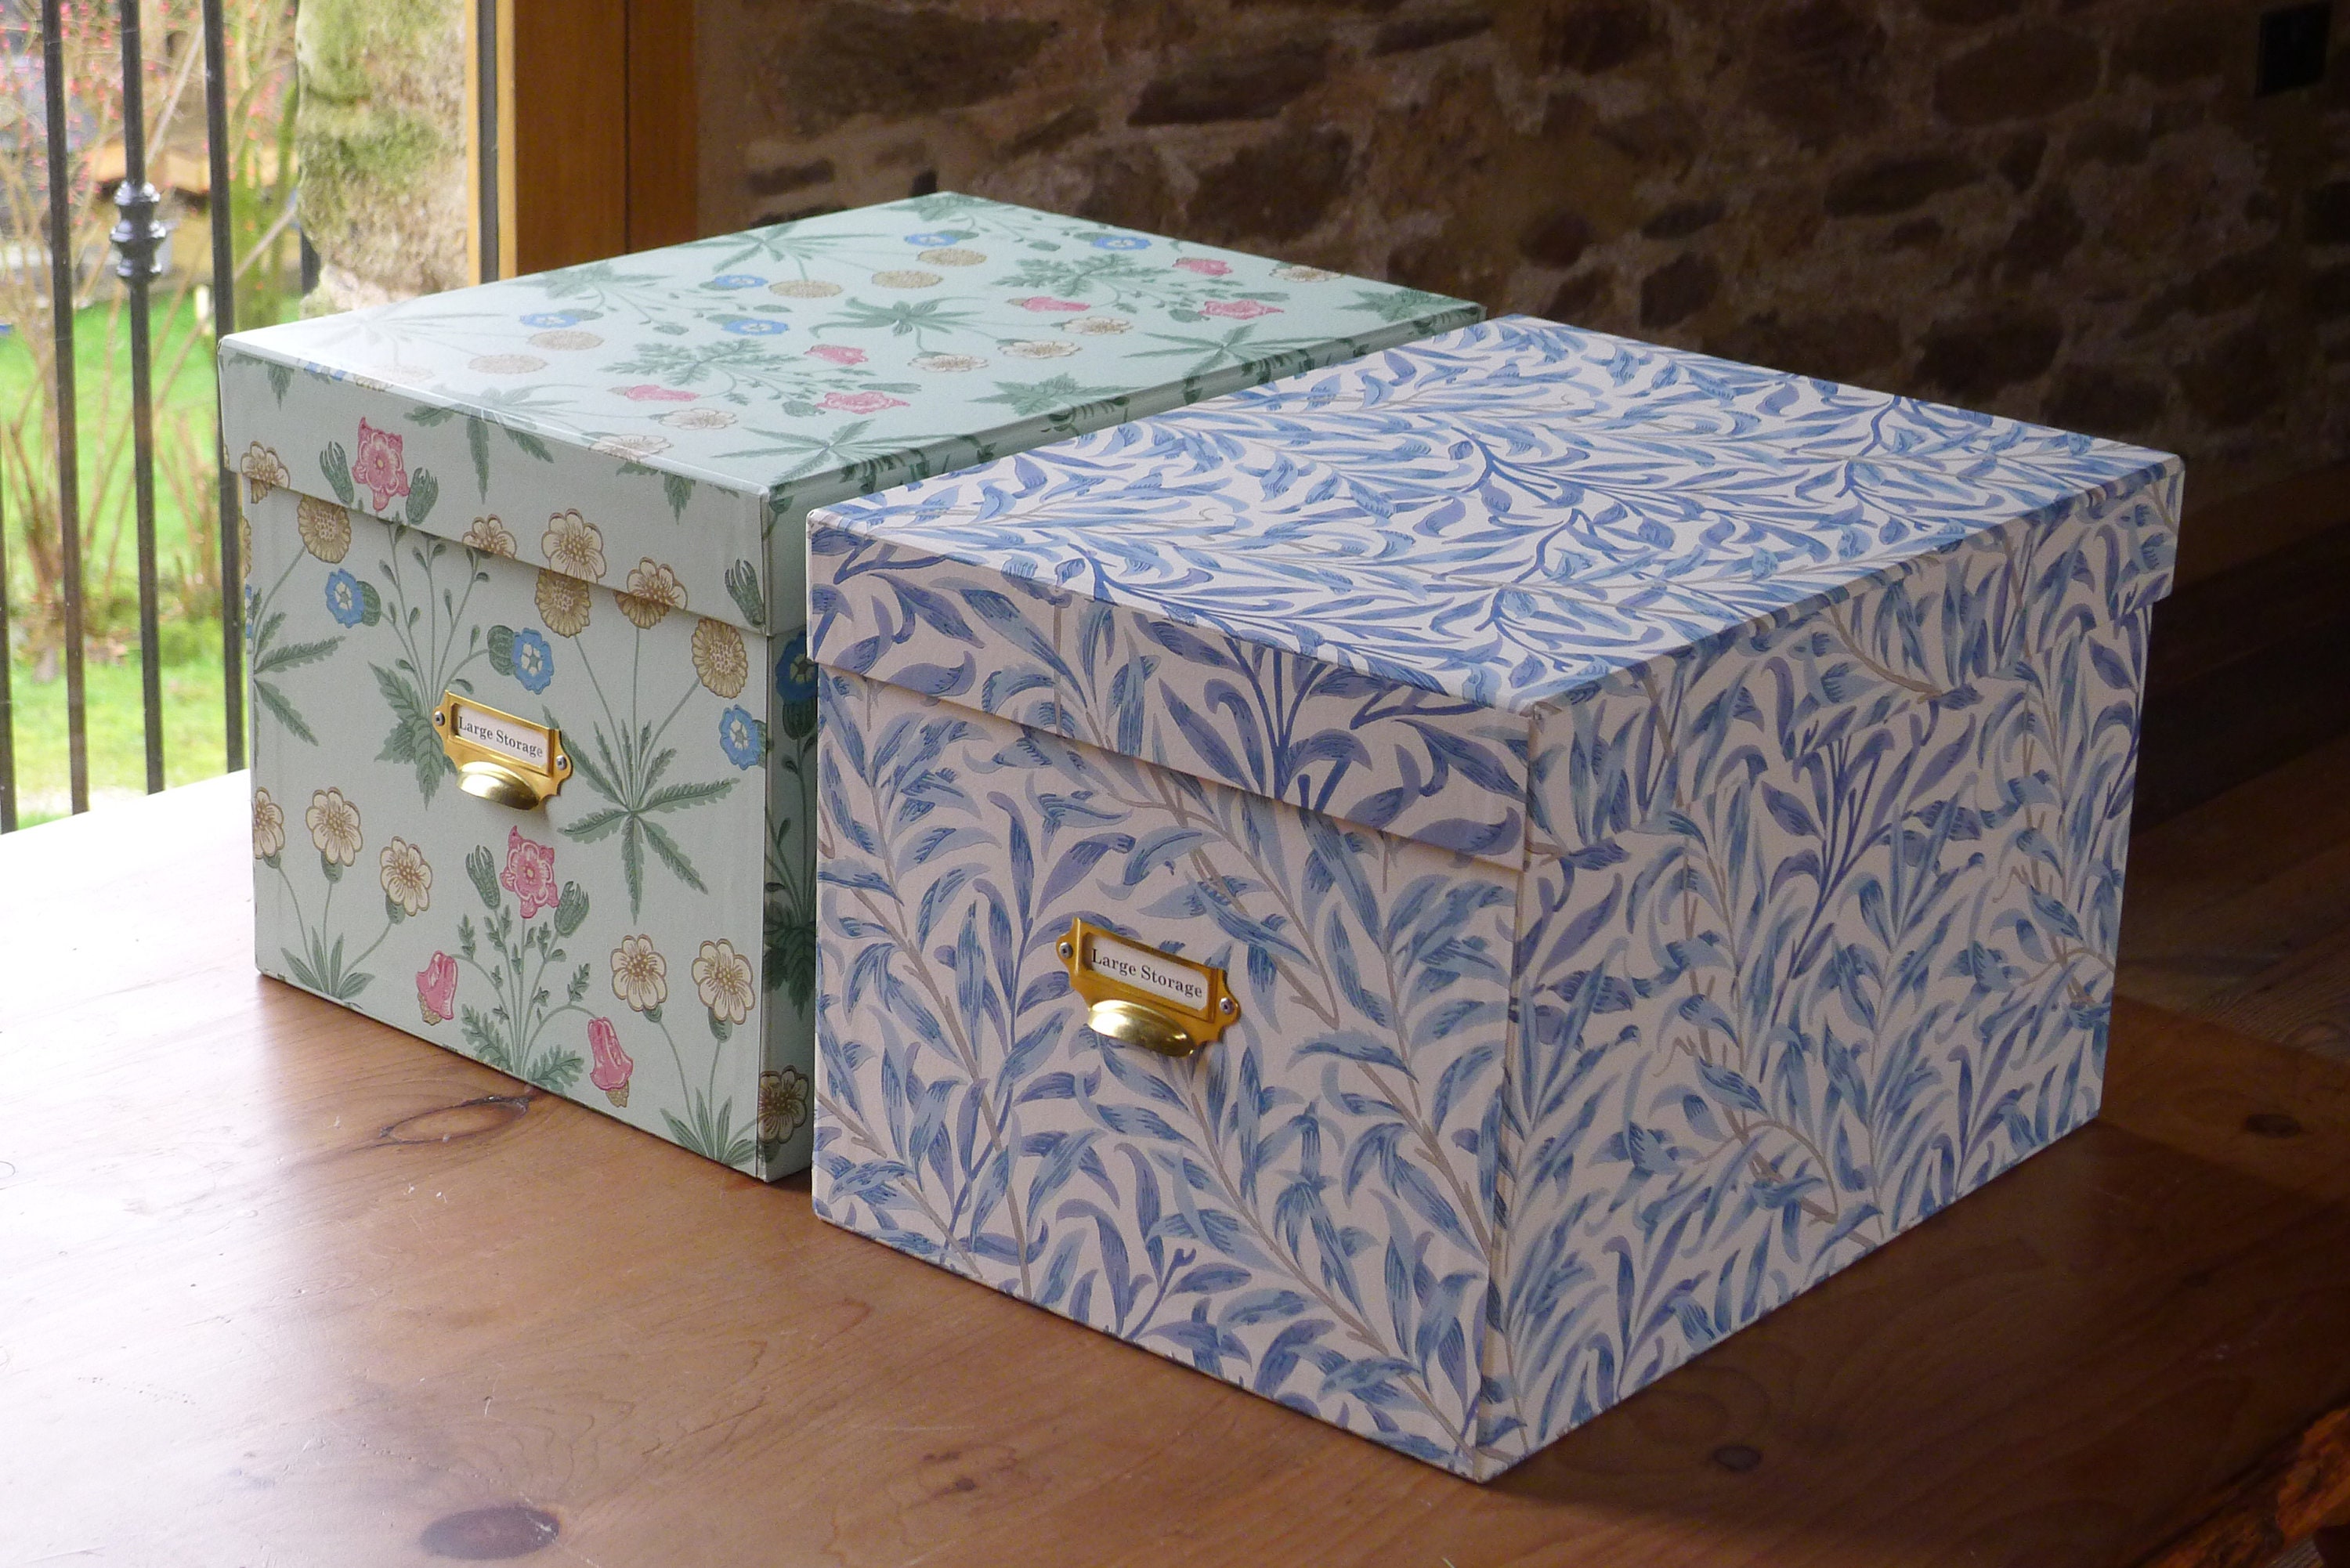 Wayfair | Large Decorative Boxes You'll Love in 2023